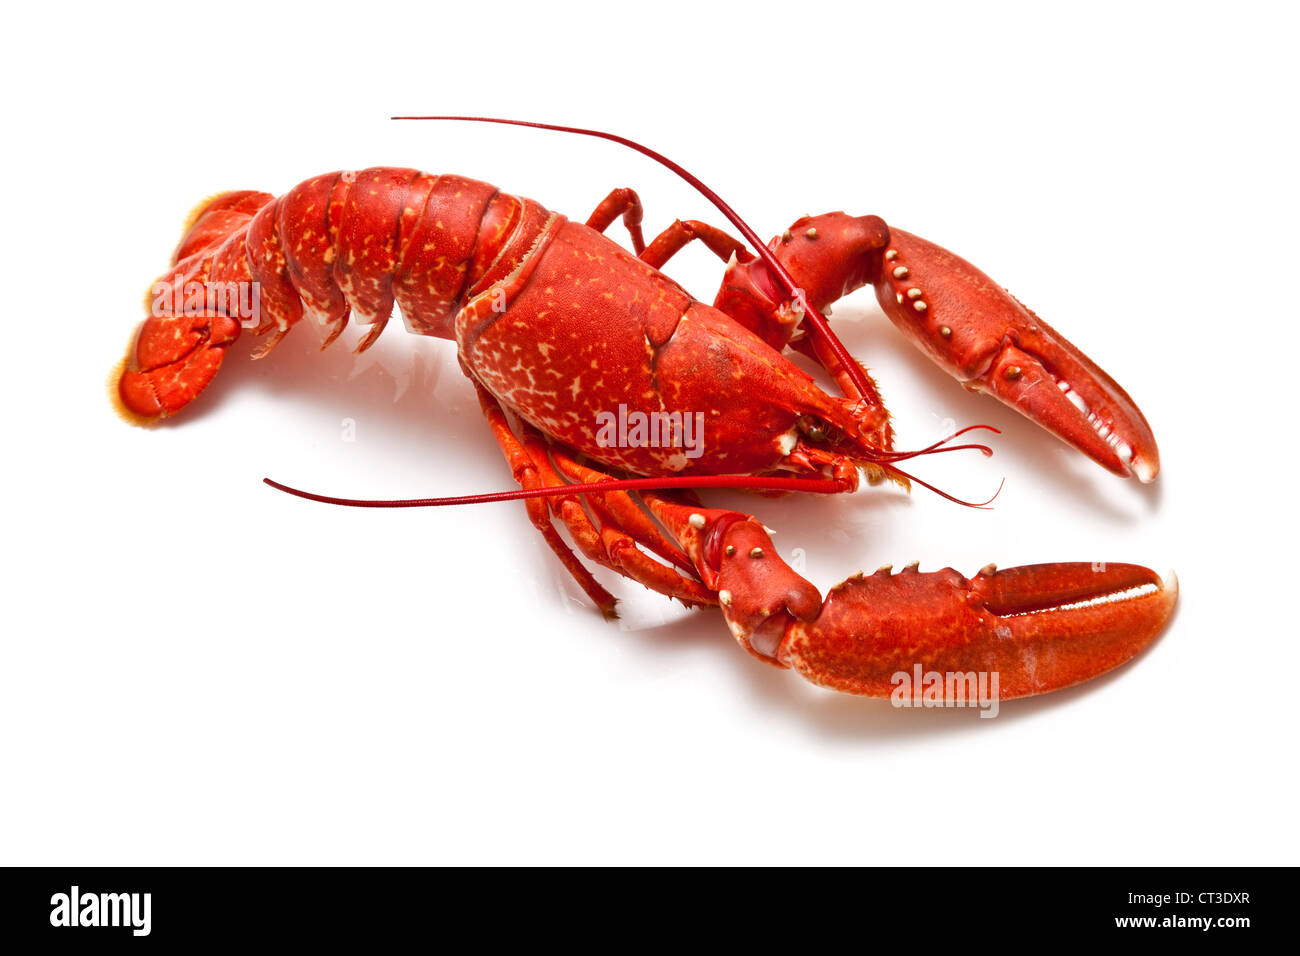 European lobster hi-res stock and images - Alamy